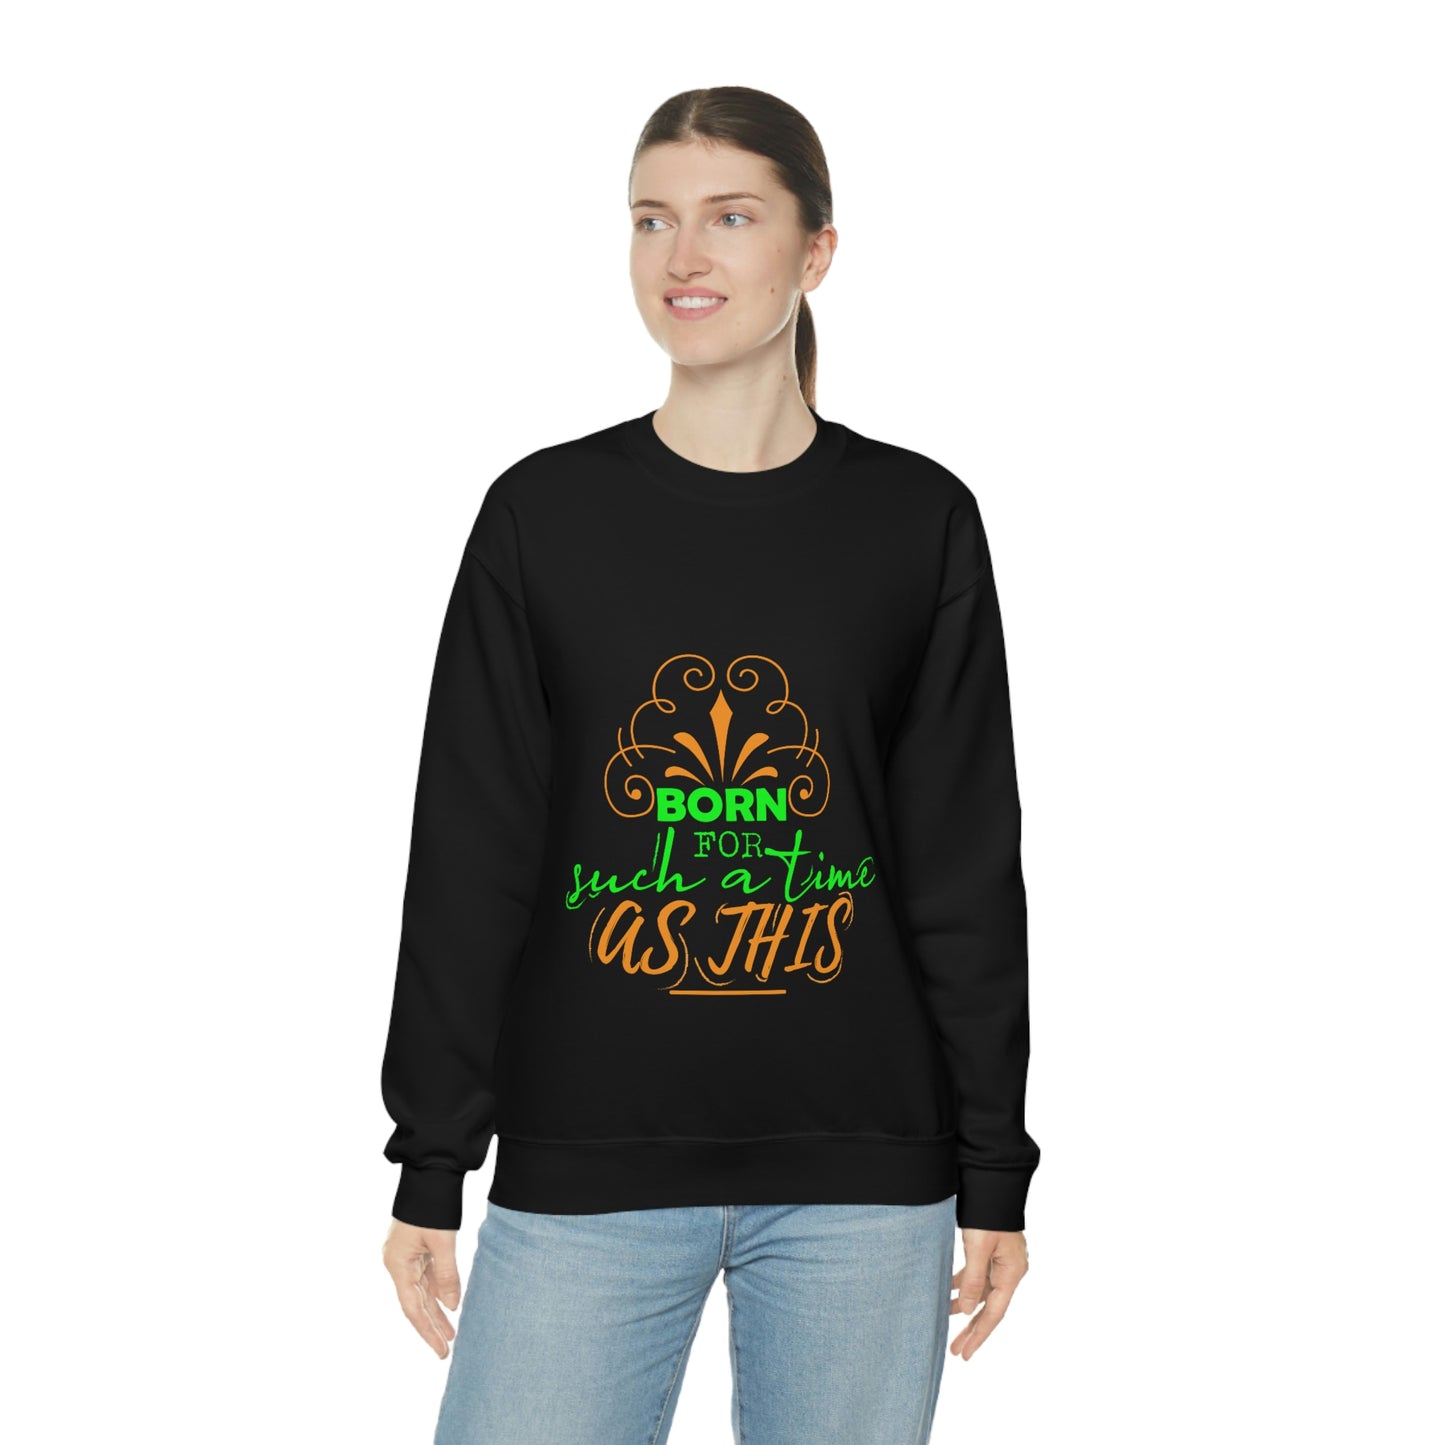 Born For Such A Time As This Unisex Heavy Blend™ Crewneck Sweatshirt